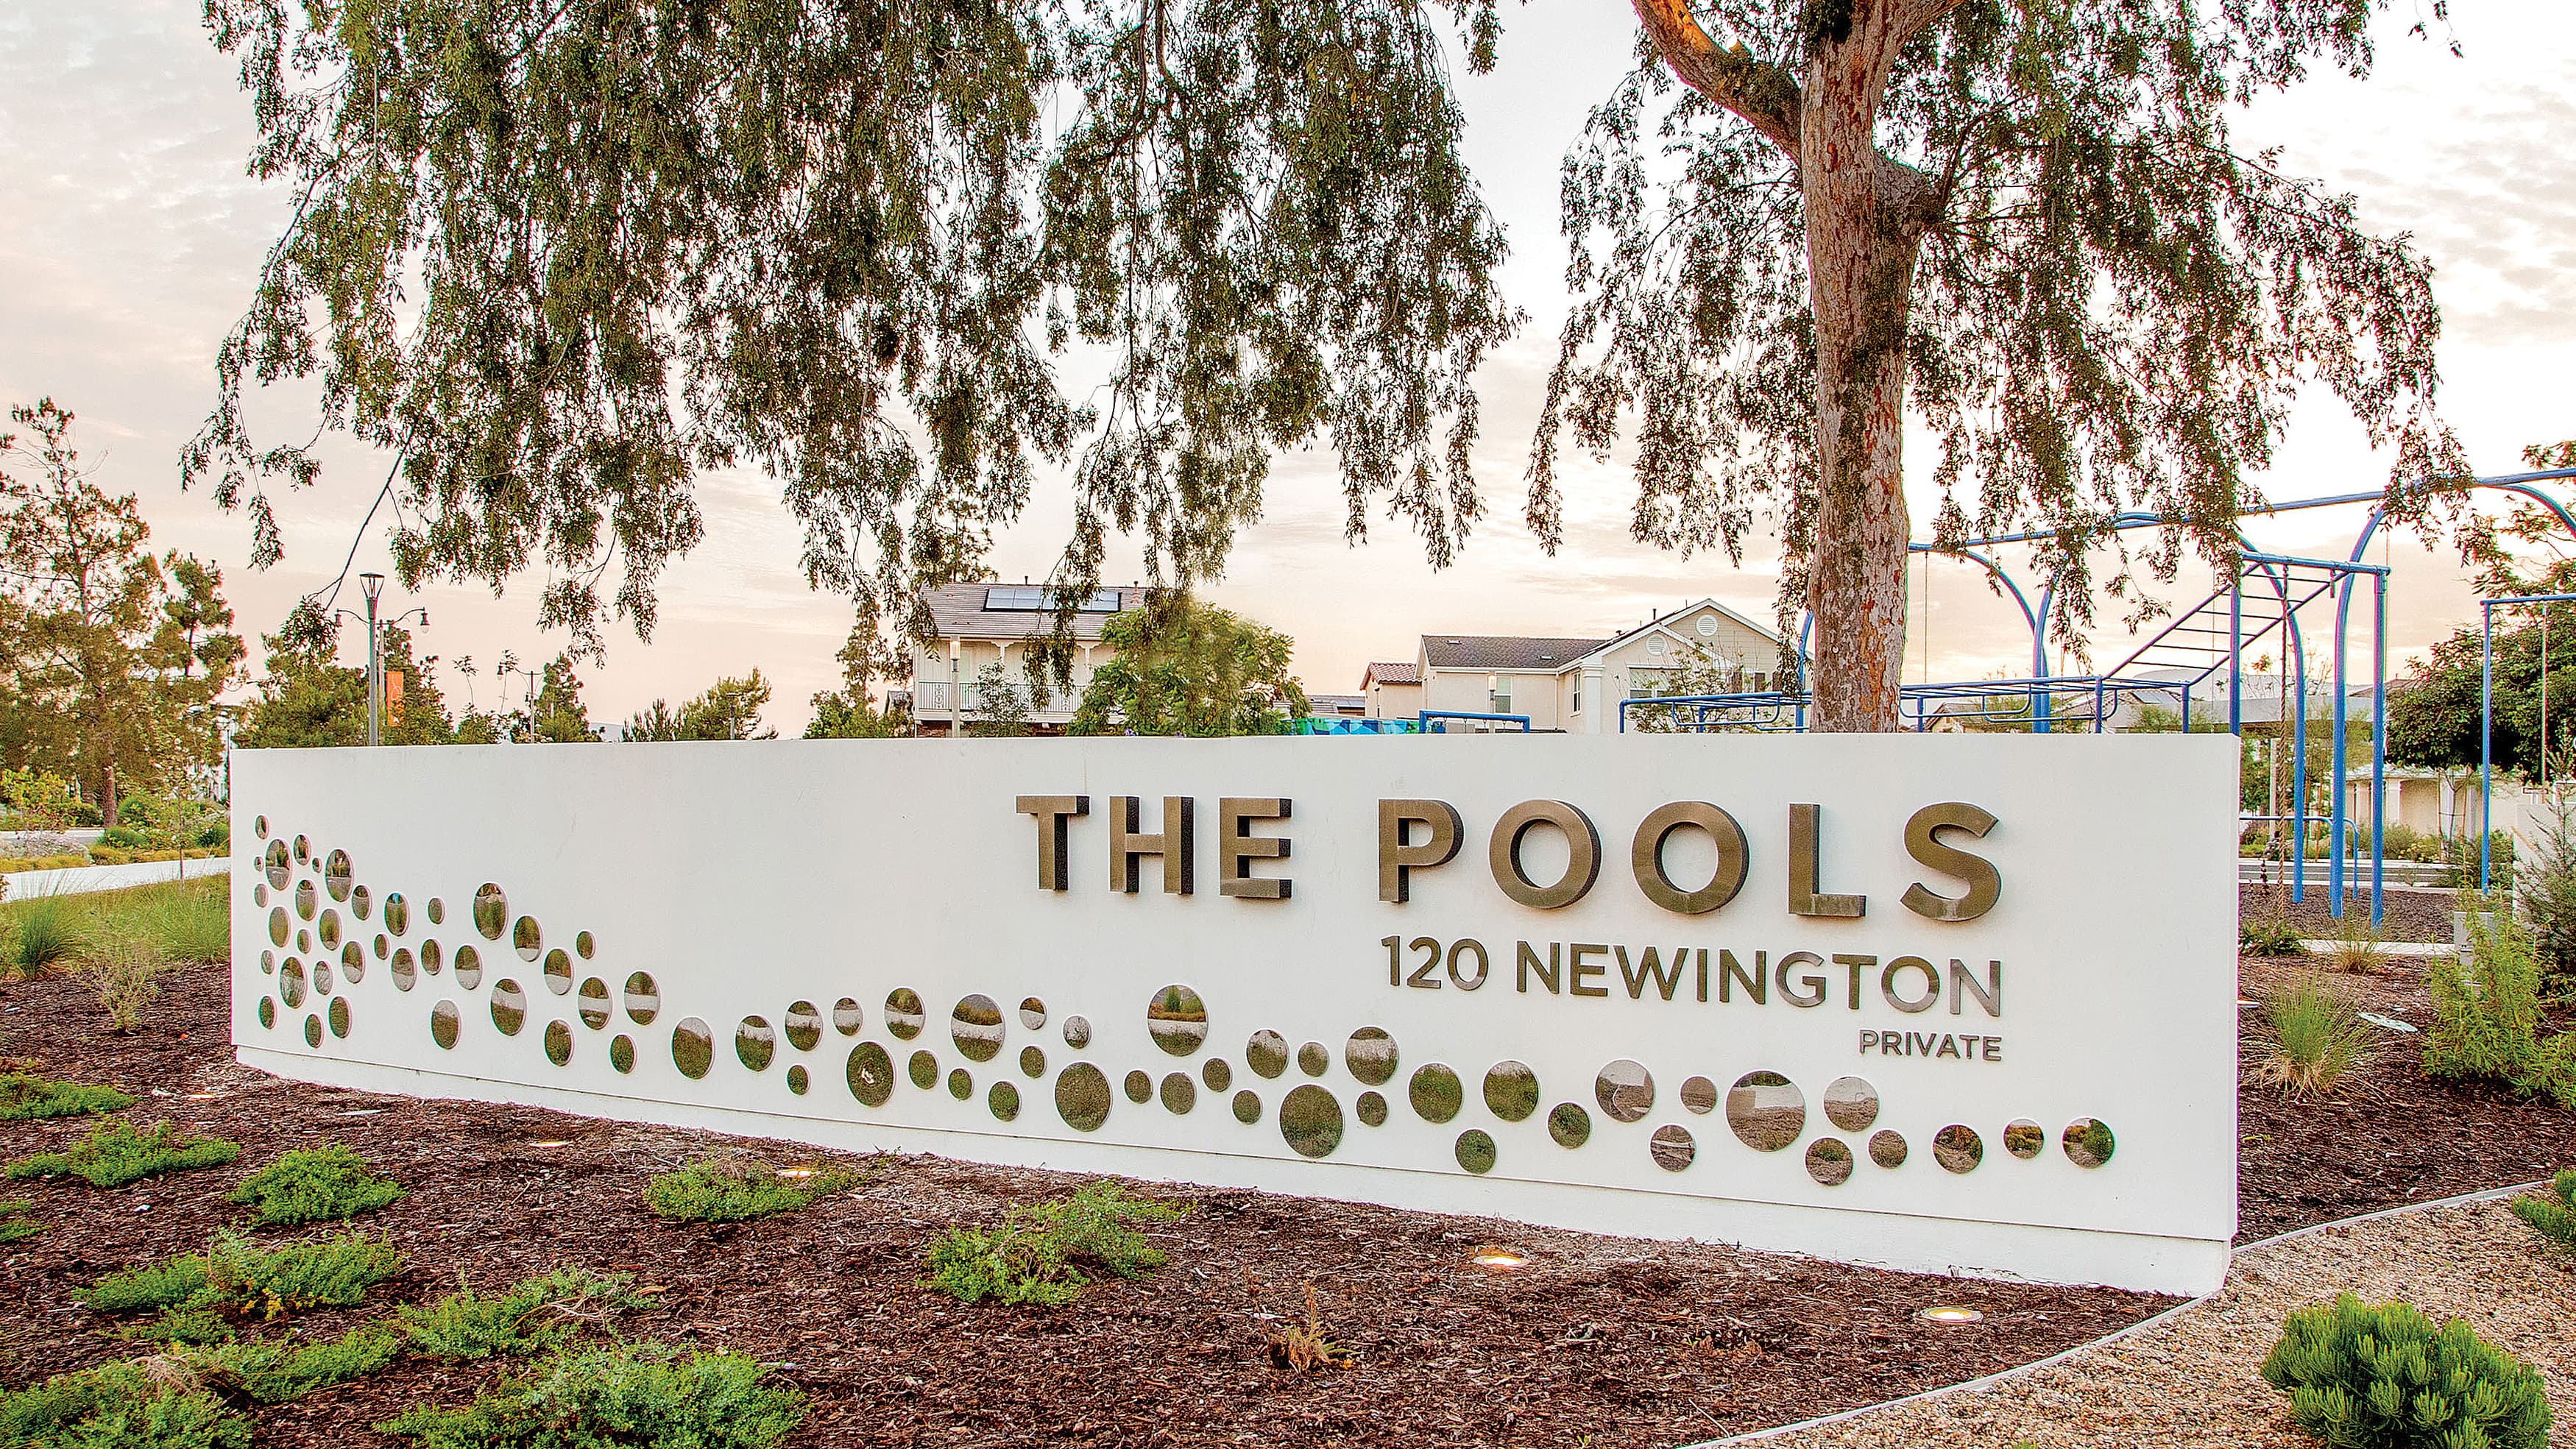 The Pools monument identity integrated in to the surrounding landscape